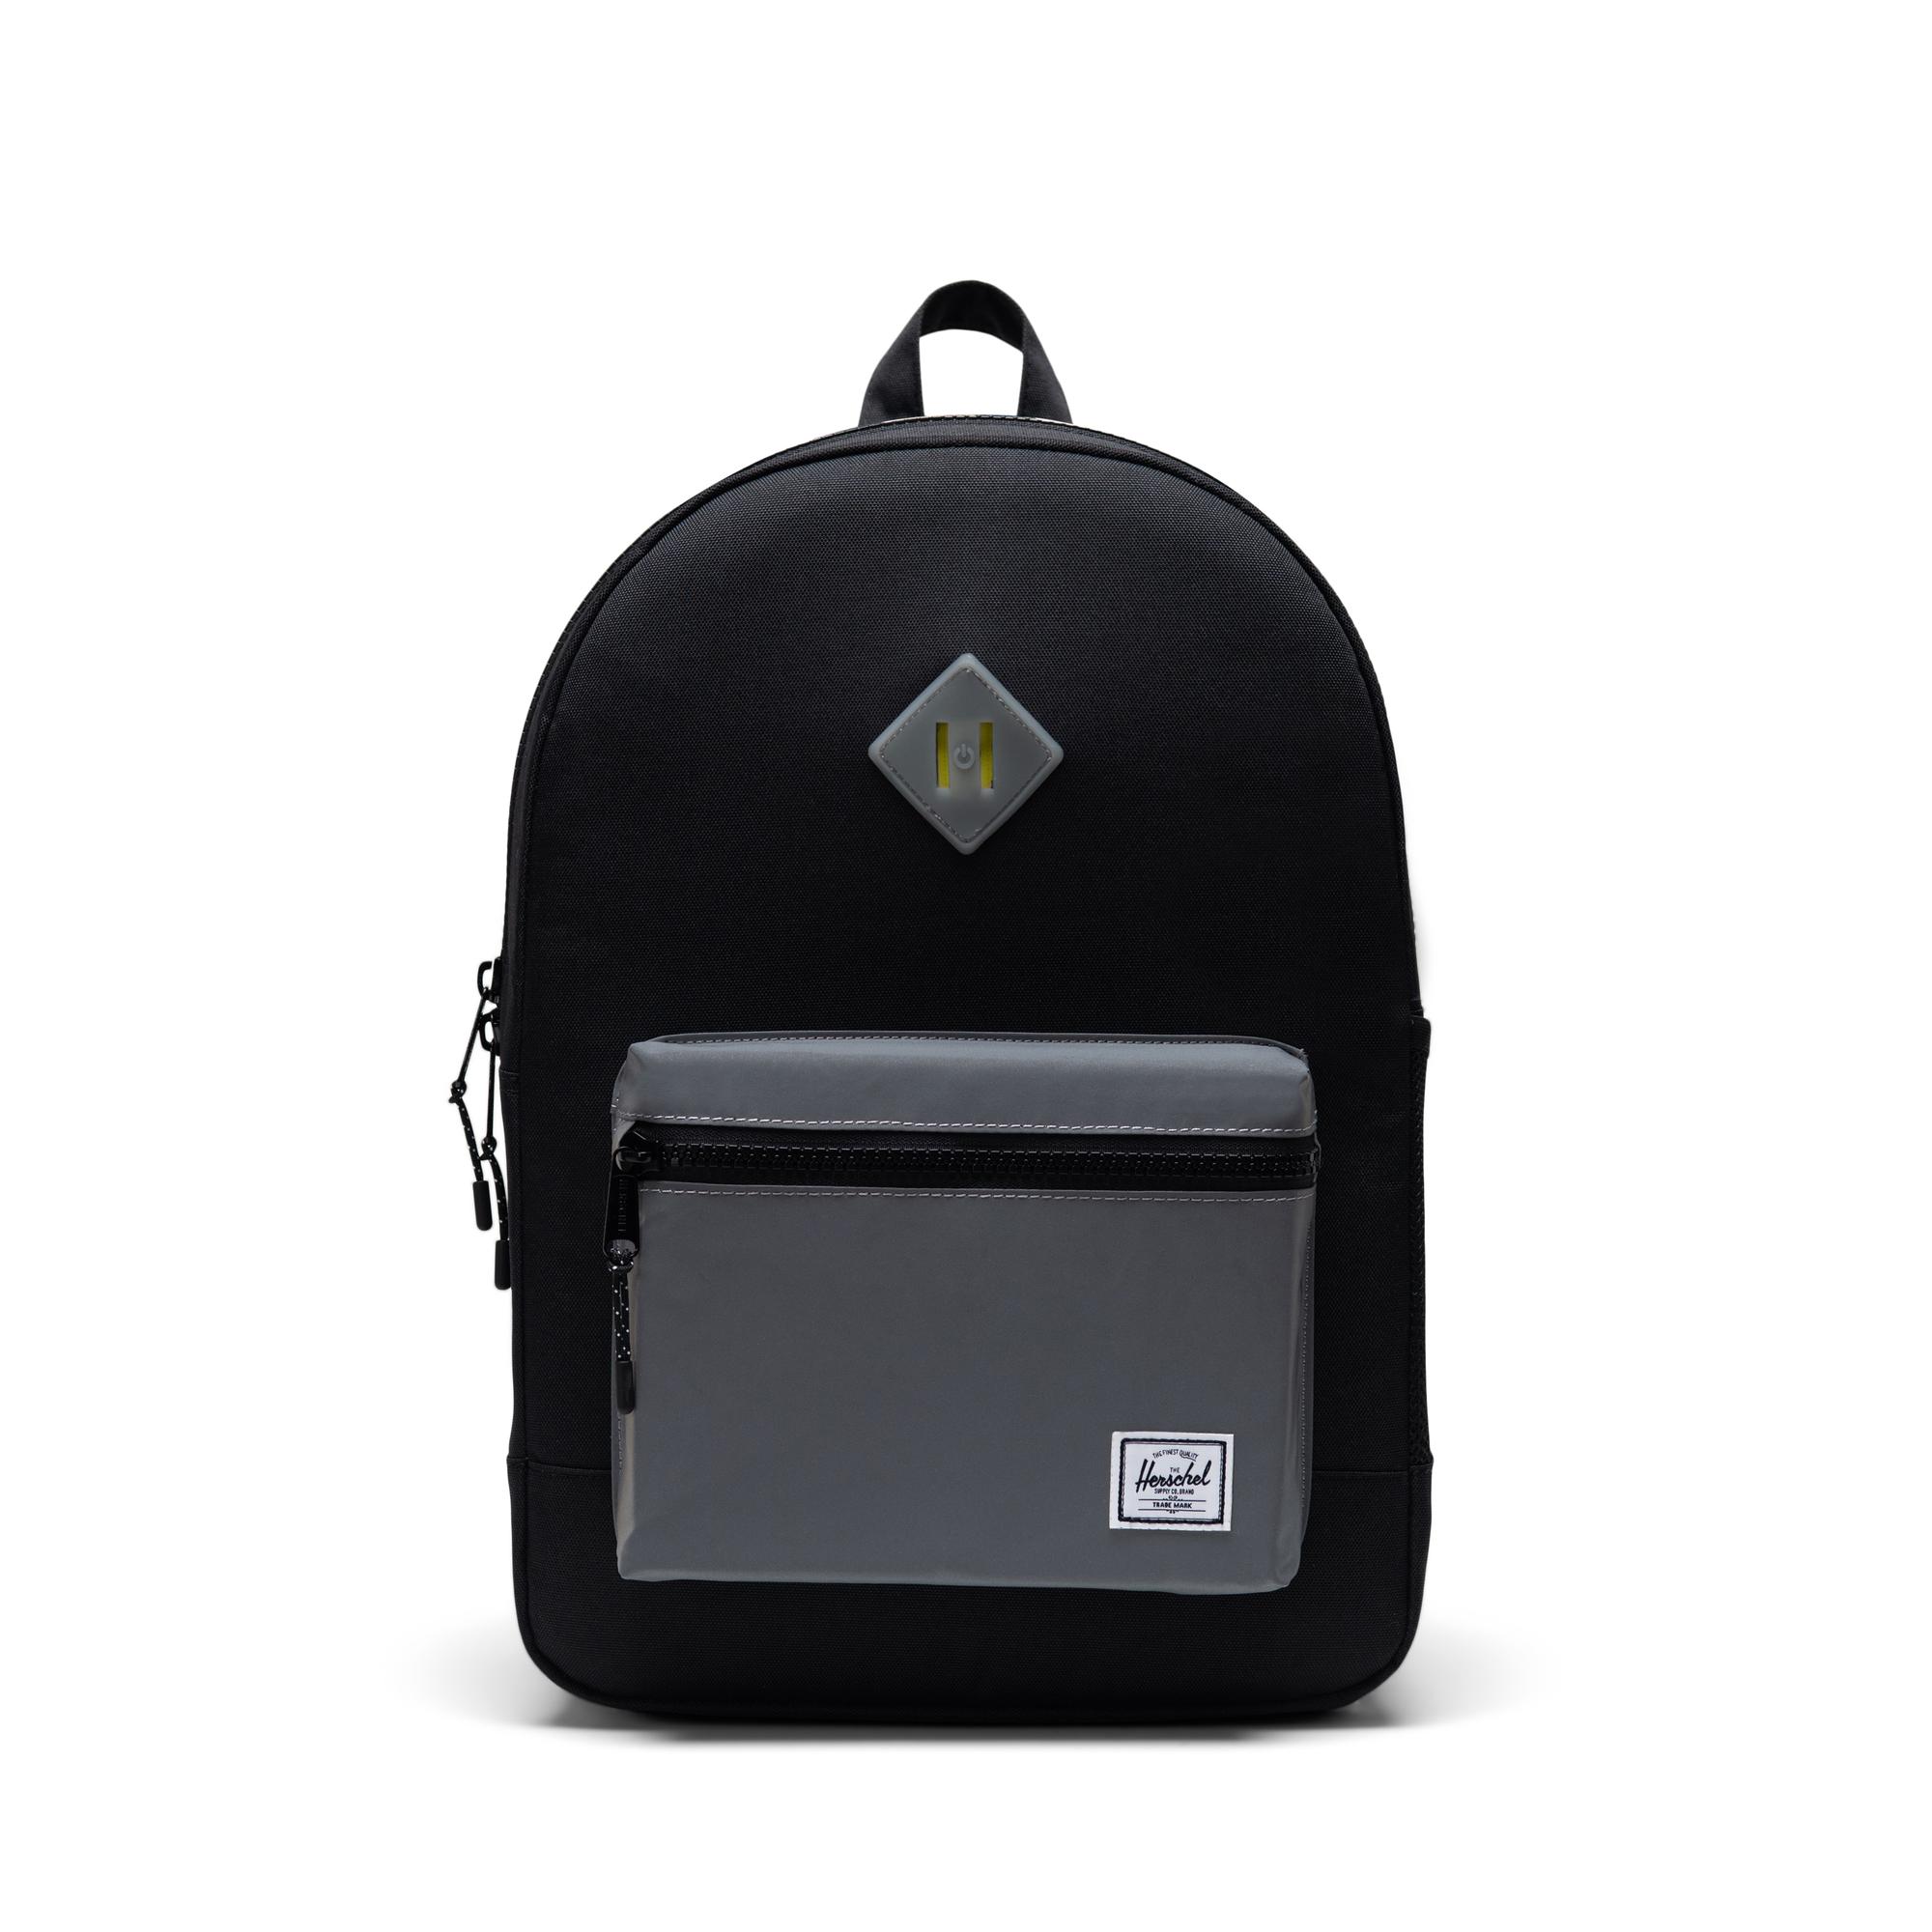 Heritage Backpack Youth XL 22L | Herschel Supply Co.